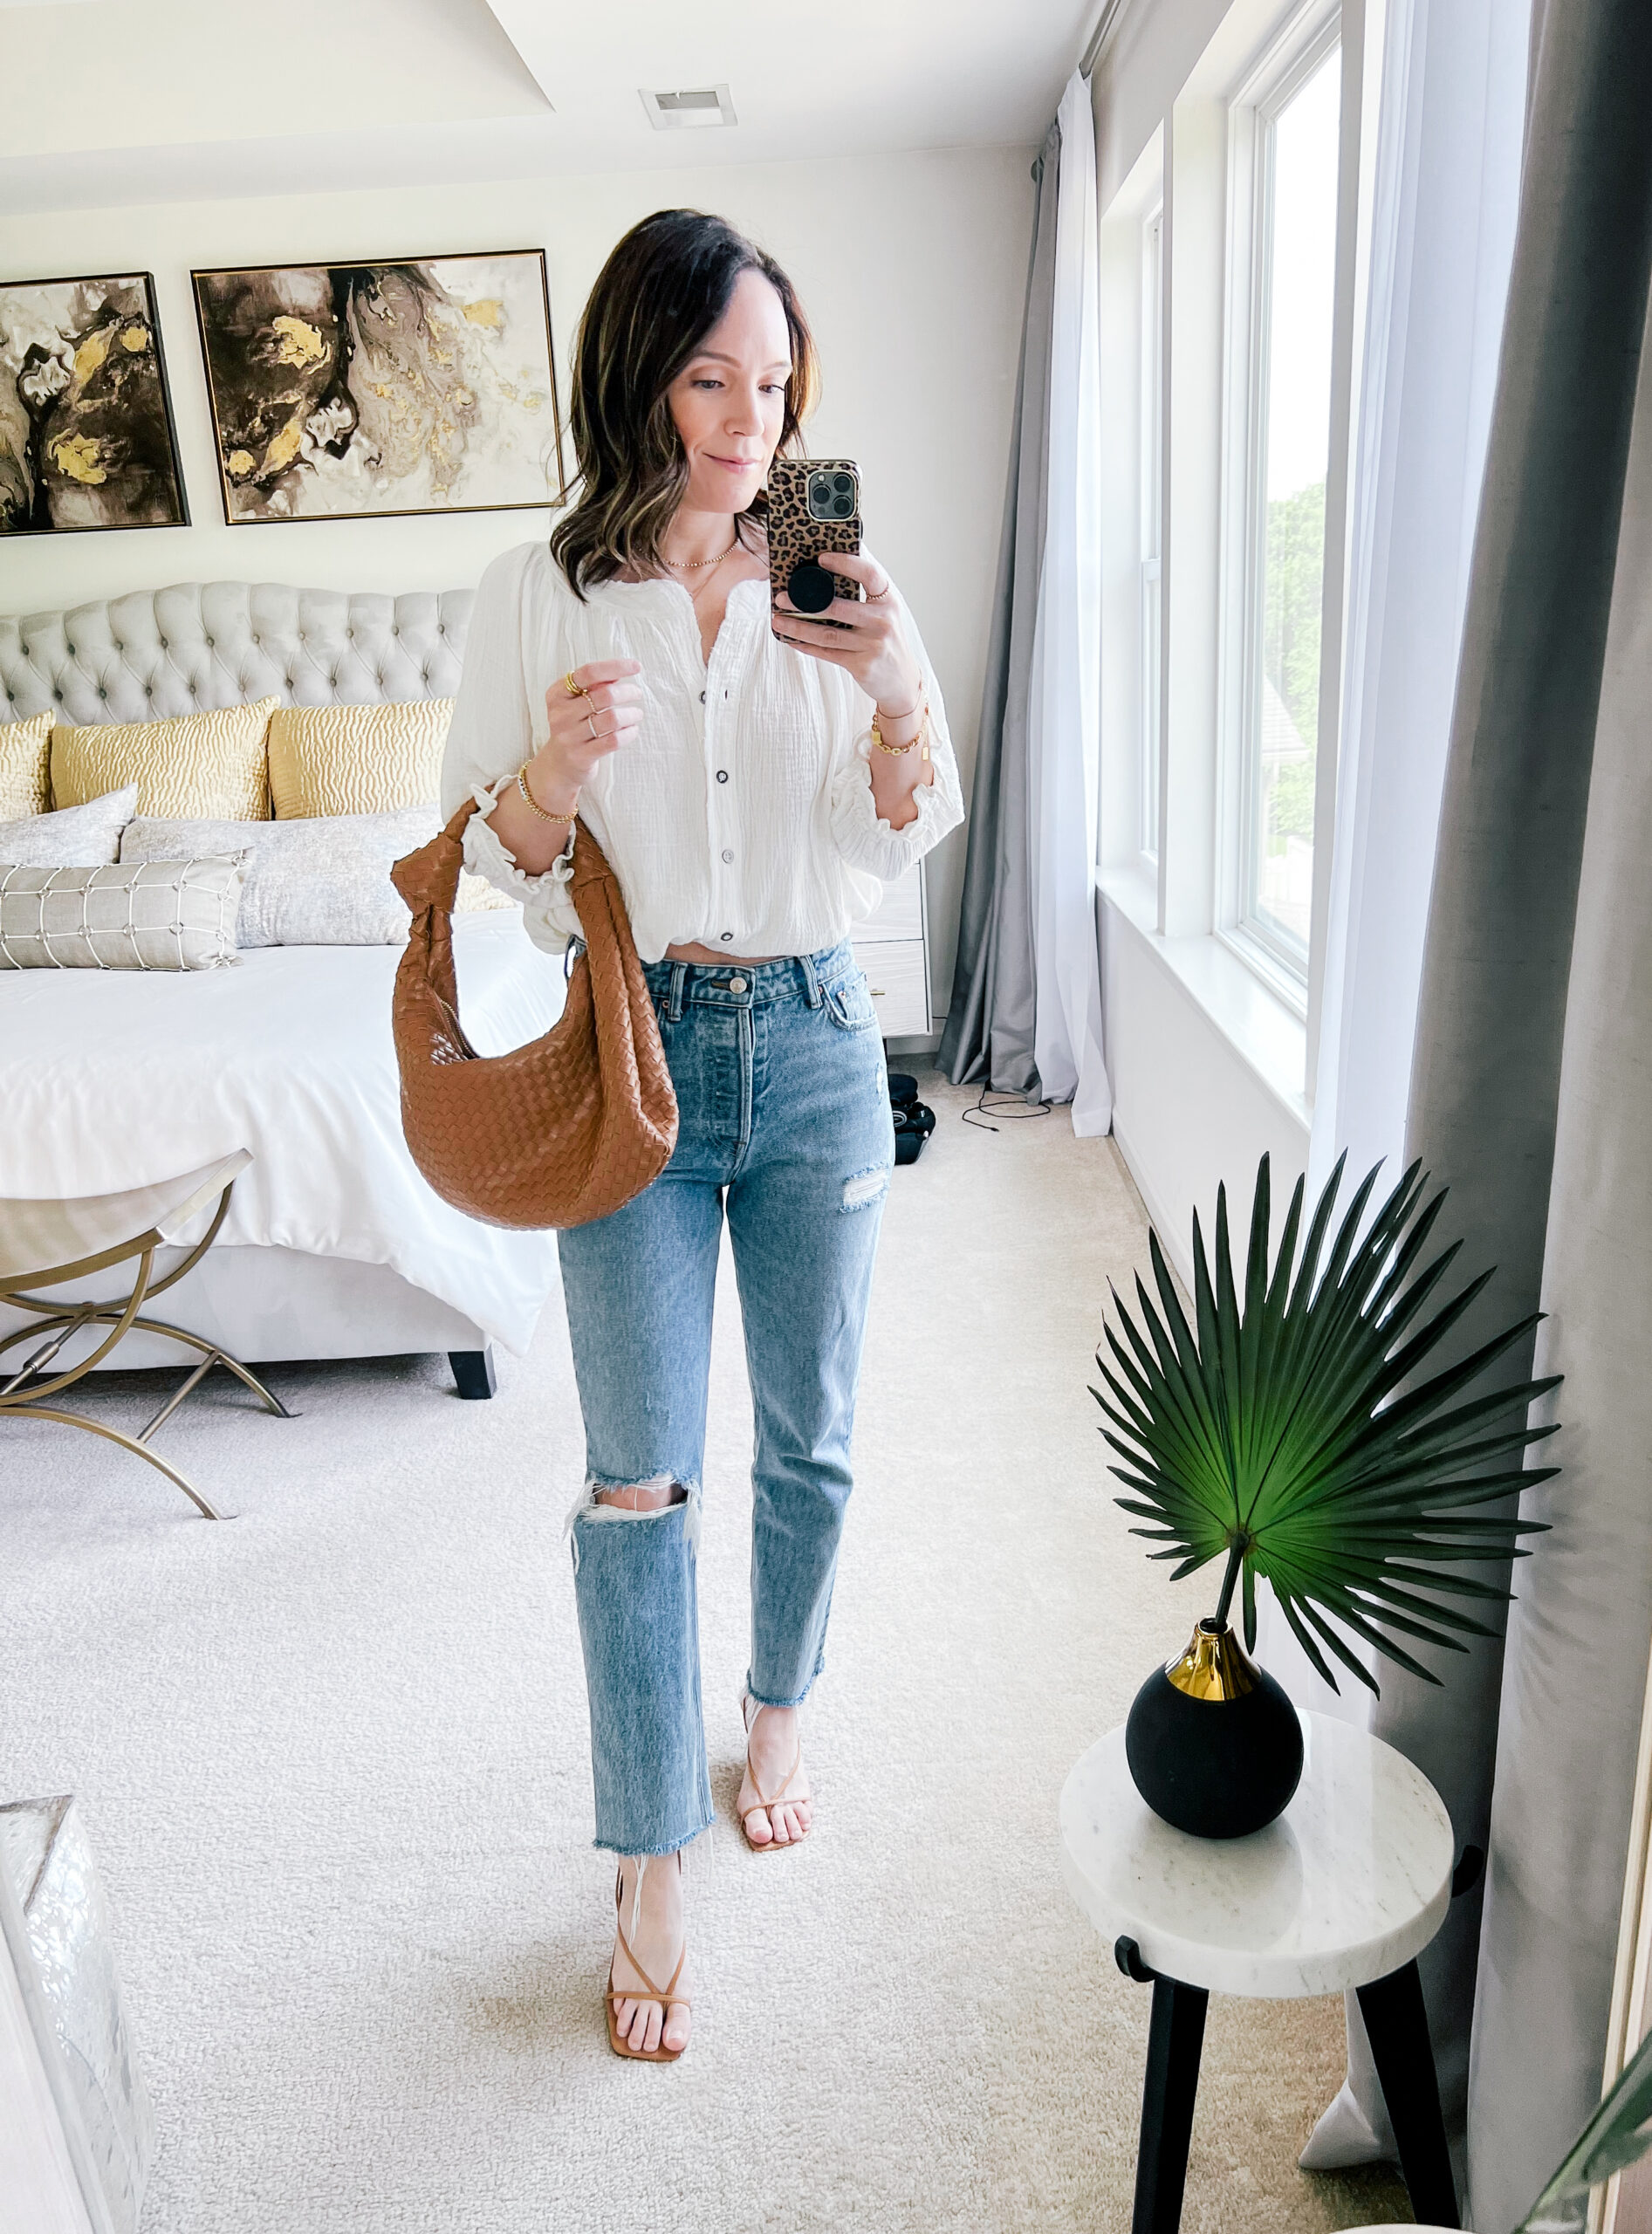 gauzy top and jeans